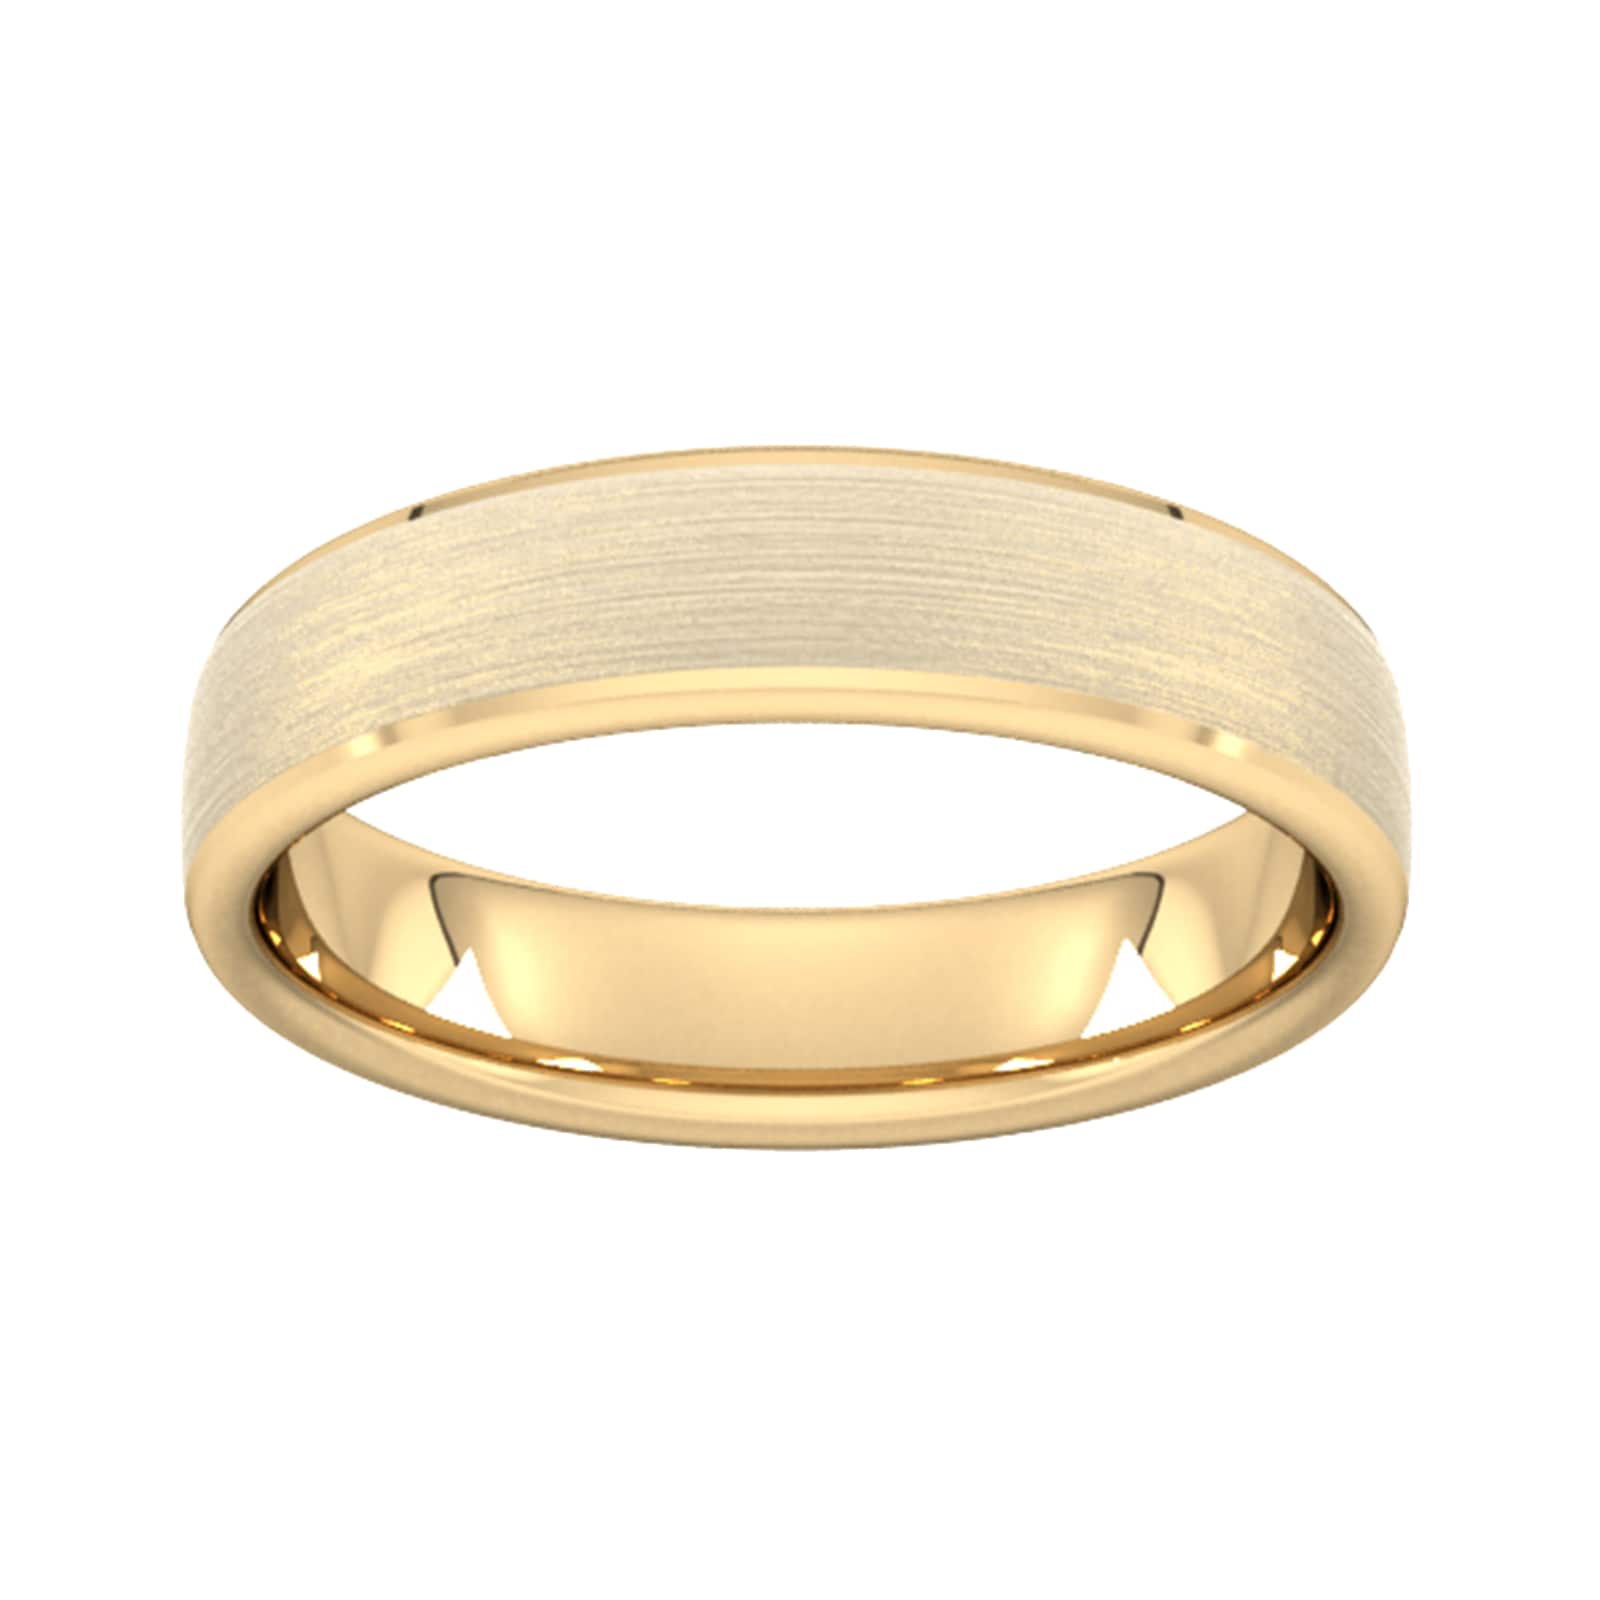 6mm D Shape Heavy Polished Chamfered Edges With Matt Centre Wedding Ring In 9 Carat Yellow Gold - Ring Size O